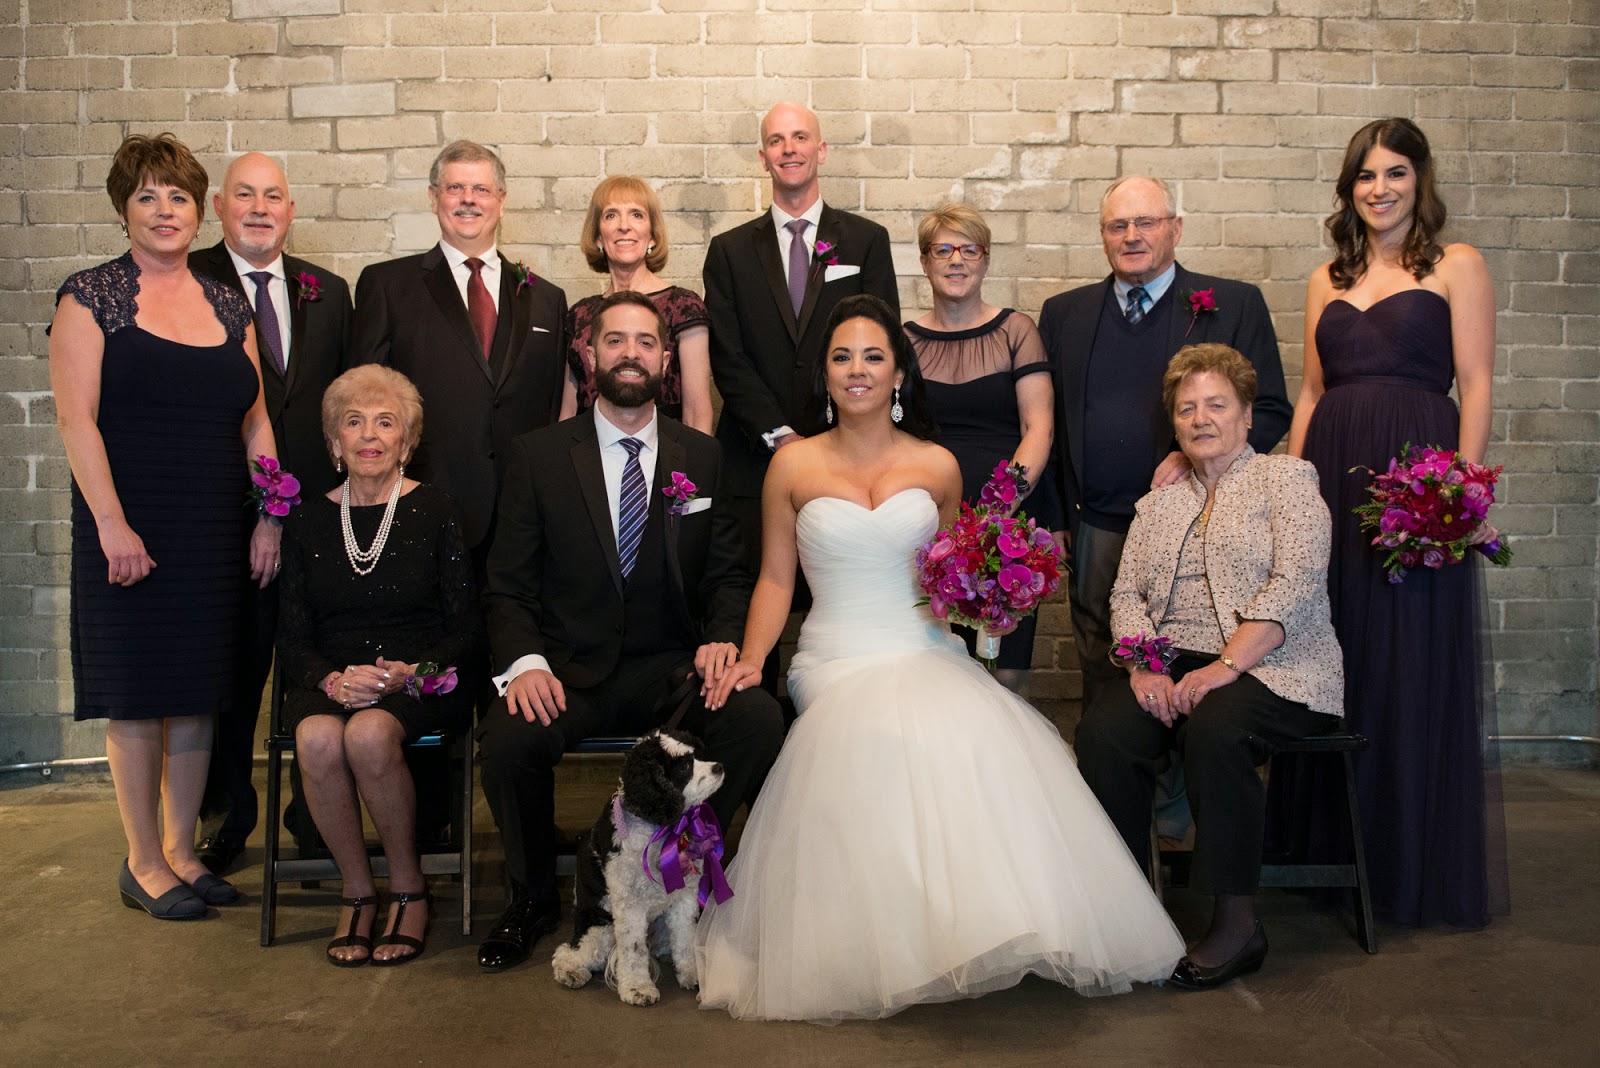 How to stage a family wedding photo shoot - cultivatedrambler.com